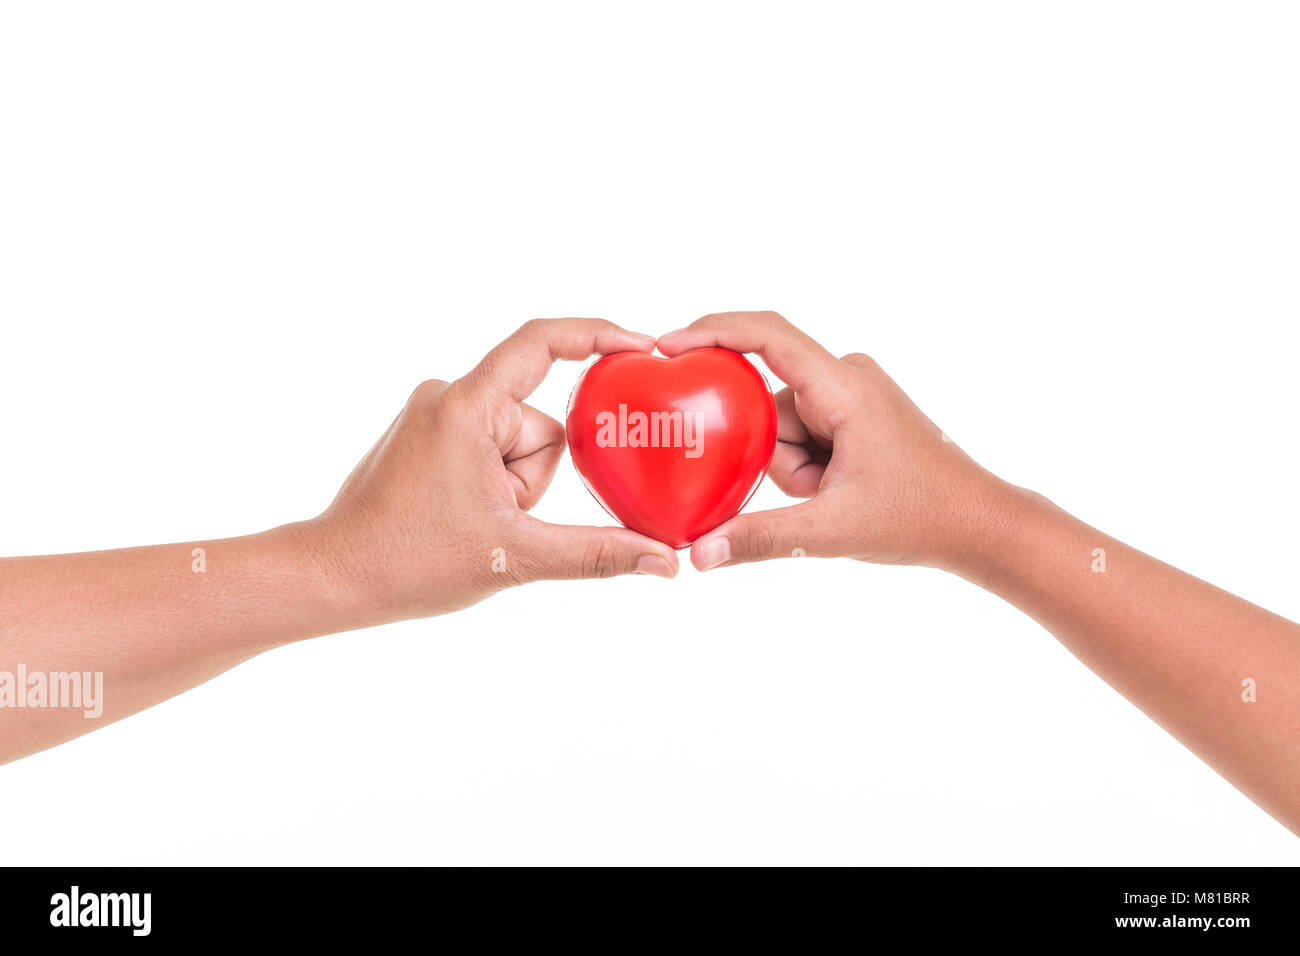 Love Mom Concept : Daughter holding and giving red heart to her mother hand isolated on white background Stock Photo